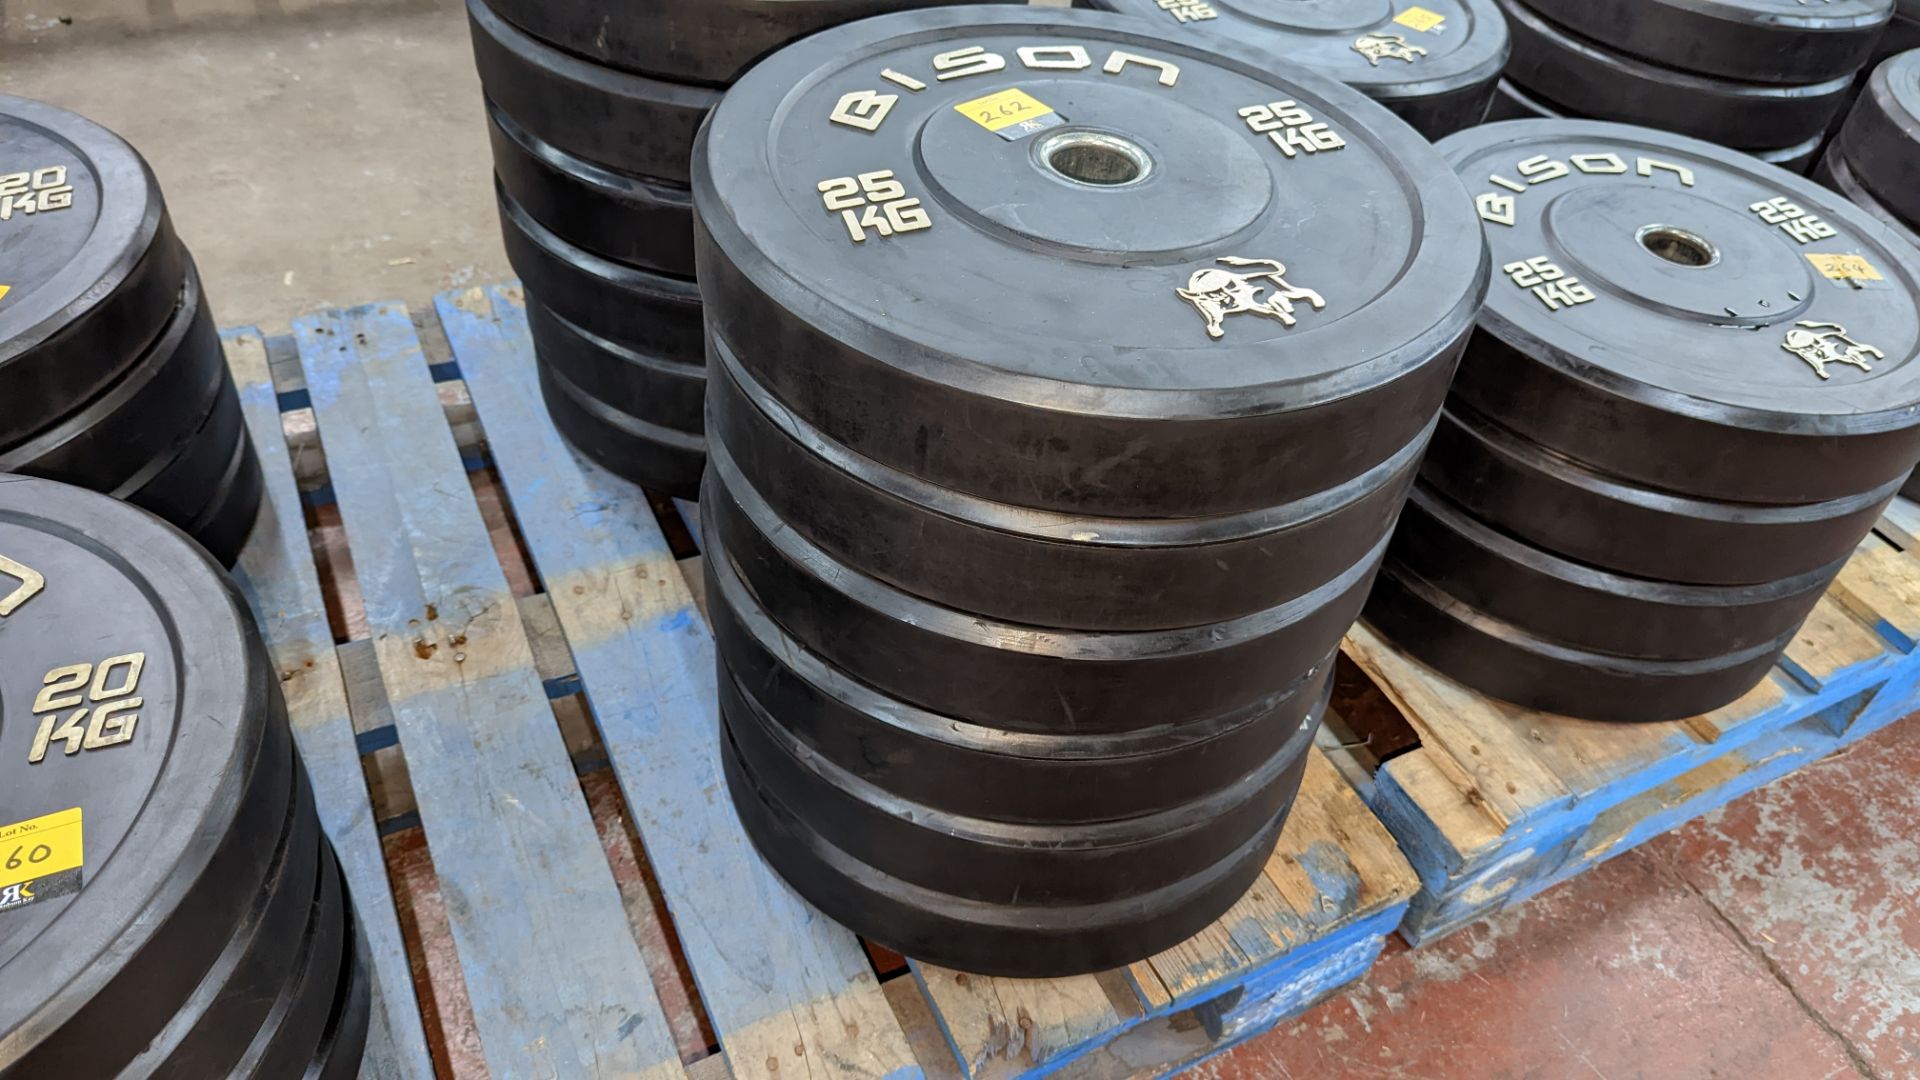 6 off Bison 25kg rubberised Olympic plates